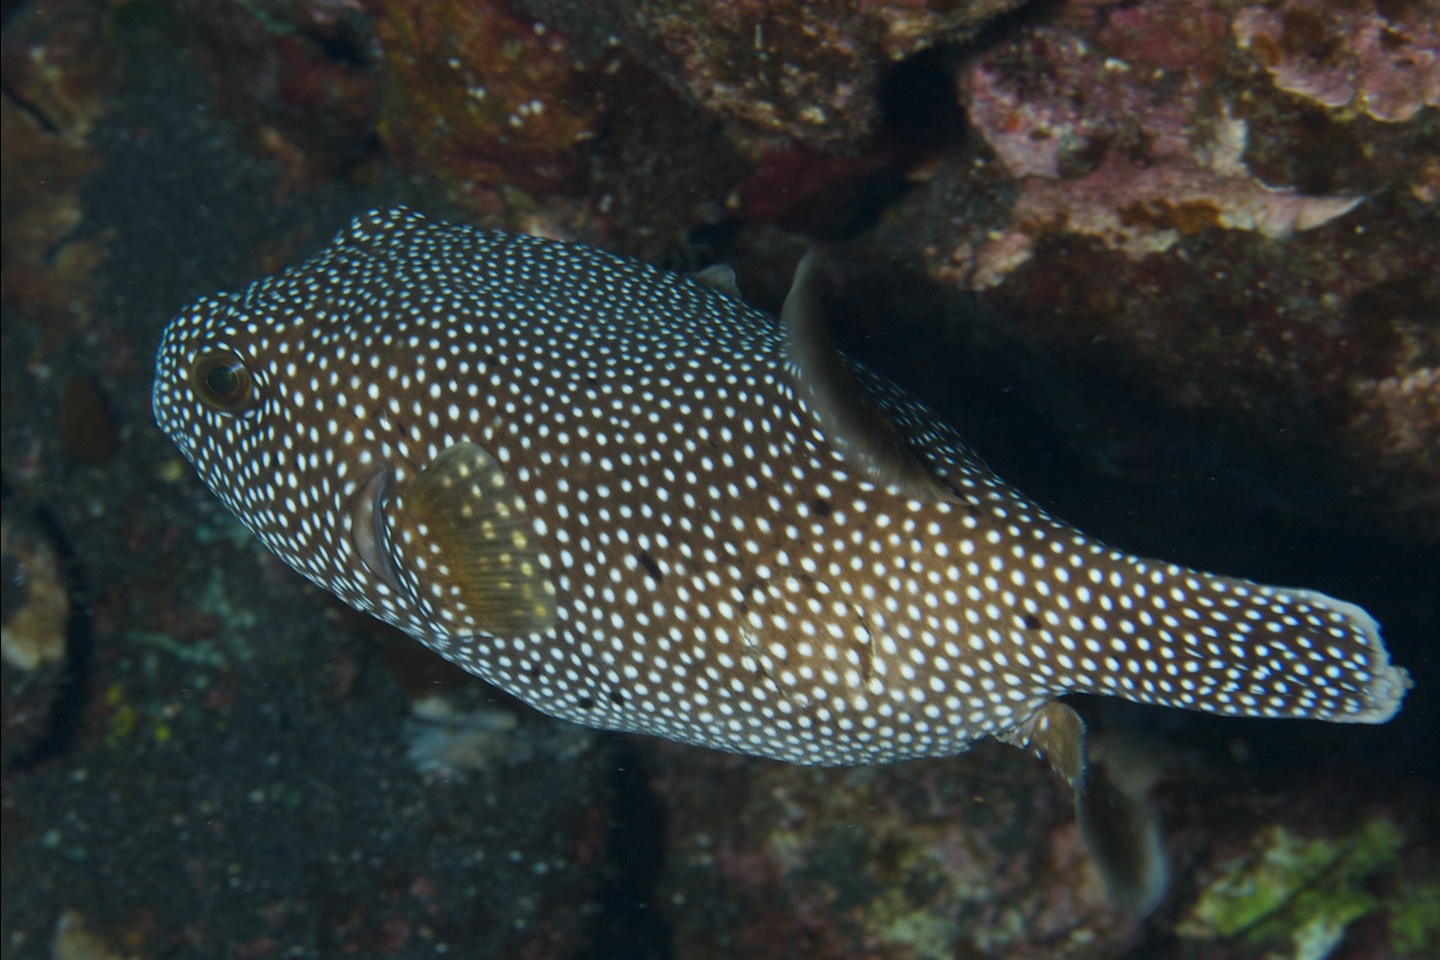 Spotted puffer